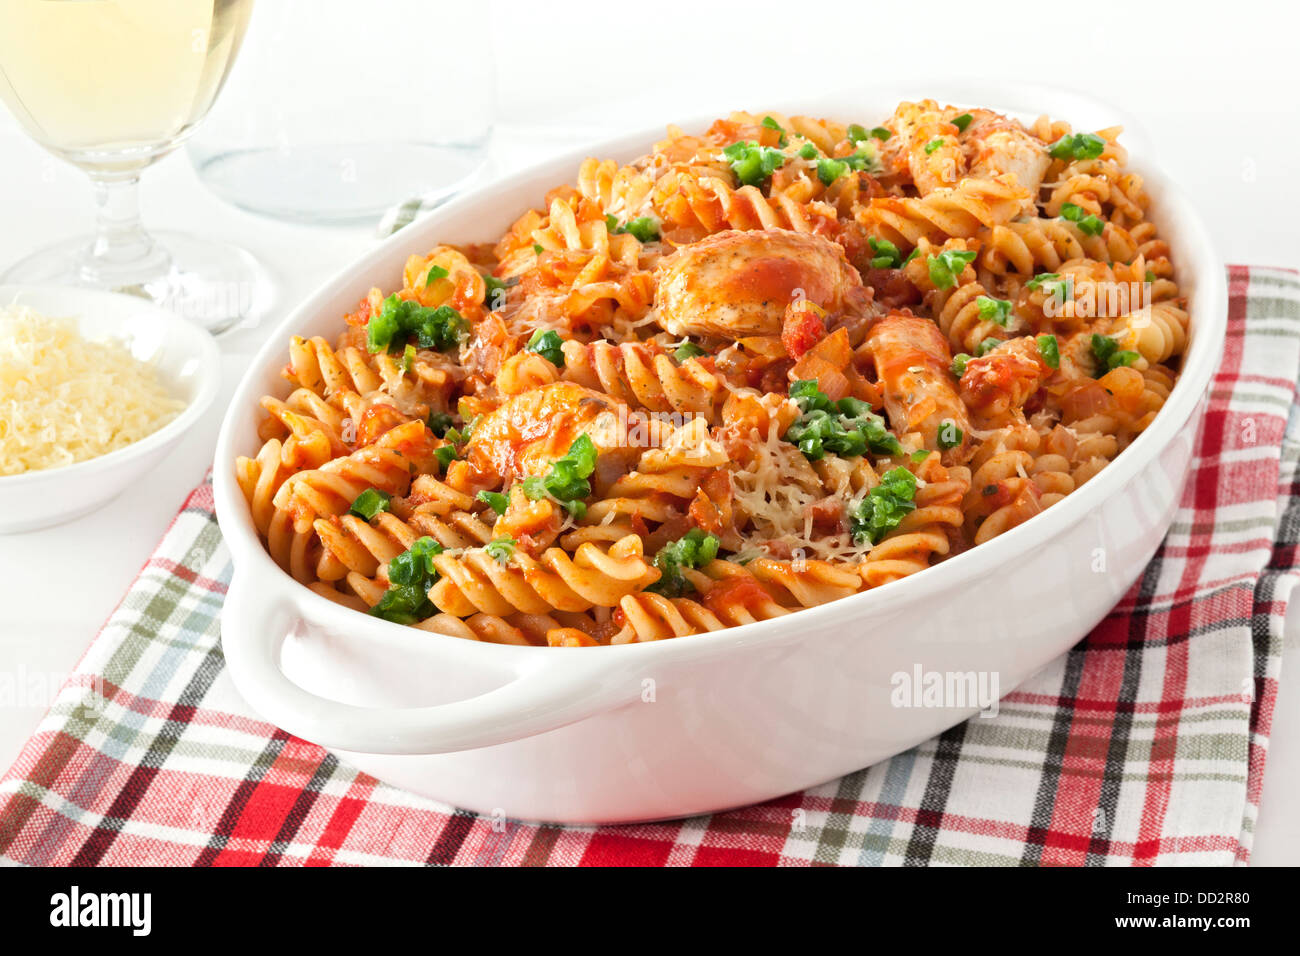 Pasta Bake with Chicken - fusili or spiral pasta, baked with chicken and marinara, topped with green chilli and parmesan. Stock Photo